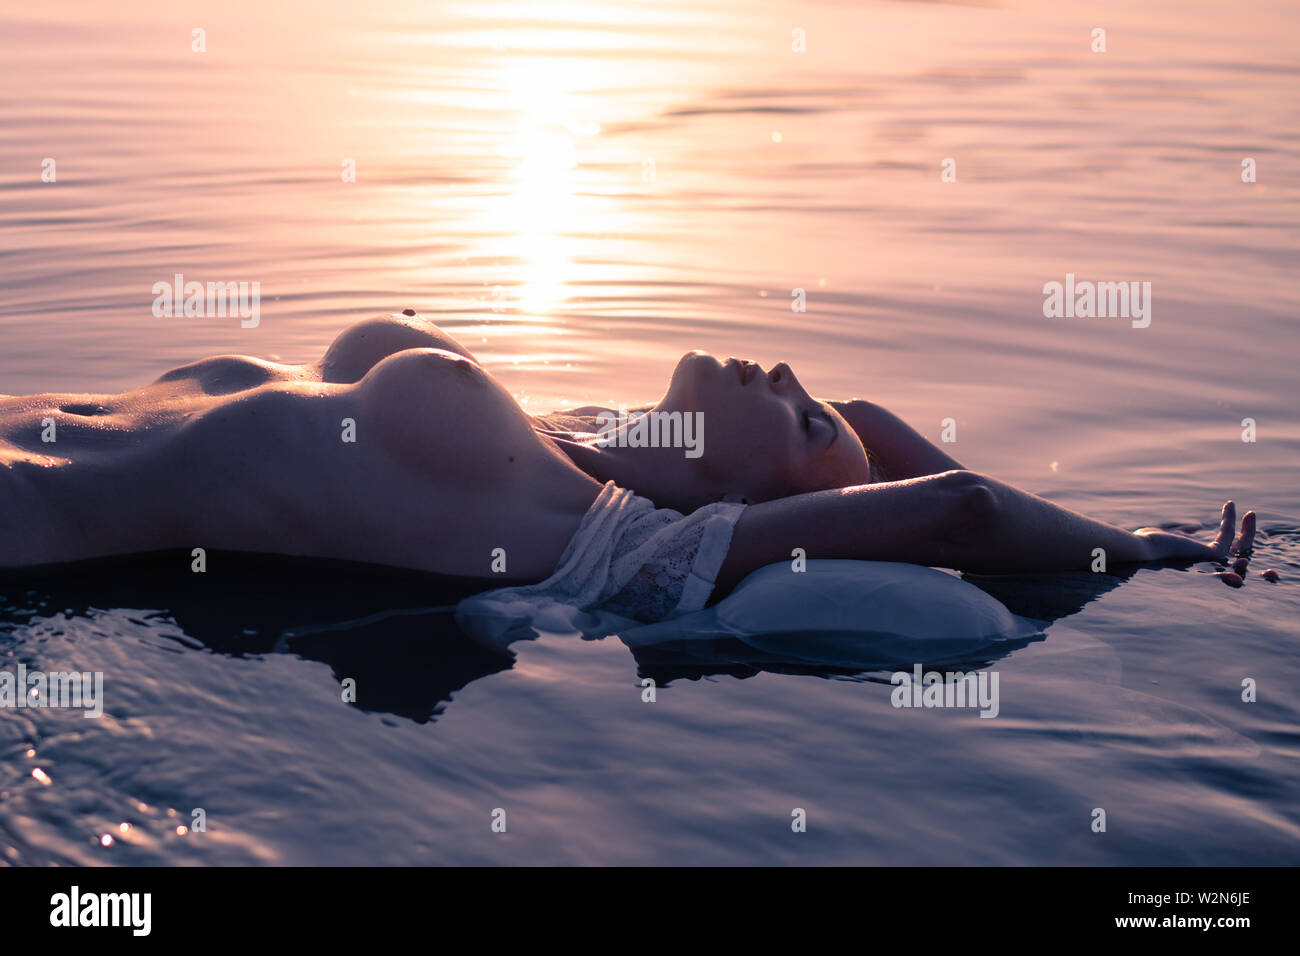 https://c8.alamy.com/comp/W2N6JE/silhouette-of-a-young-sexy-nude-woman-with-big-beautiful-breasts-lies-in-the-waves-of-the-reservoir-in-the-rays-of-the-setting-sun-W2N6JE.jpg